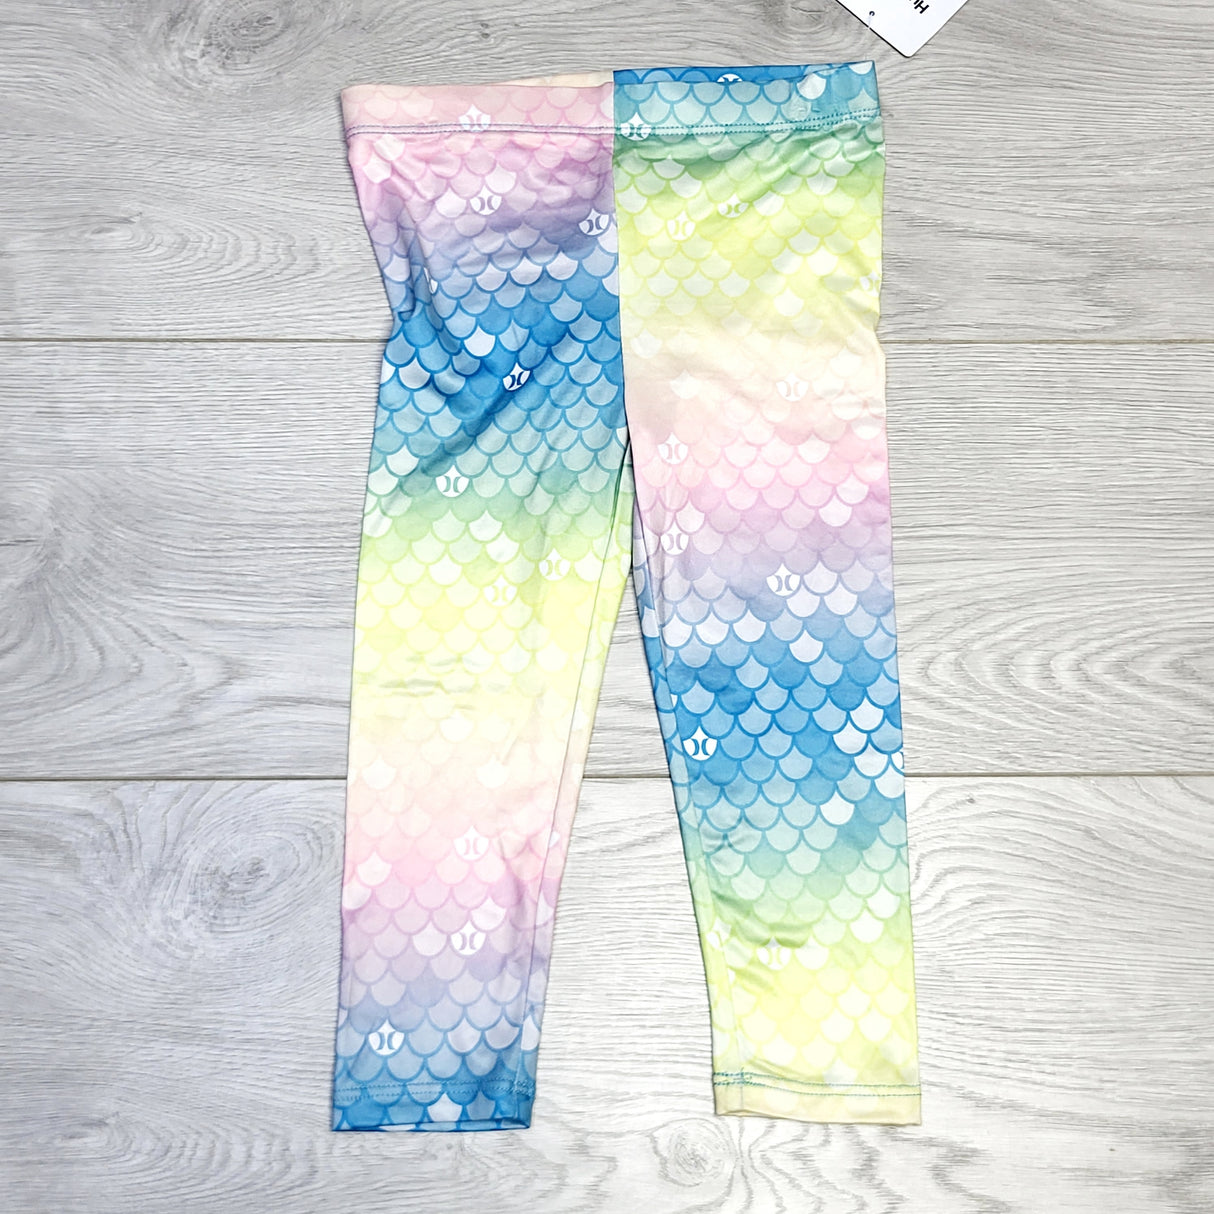 KSAL3 - NEW - Hurley active leggings with mermaid scales, size 24 months